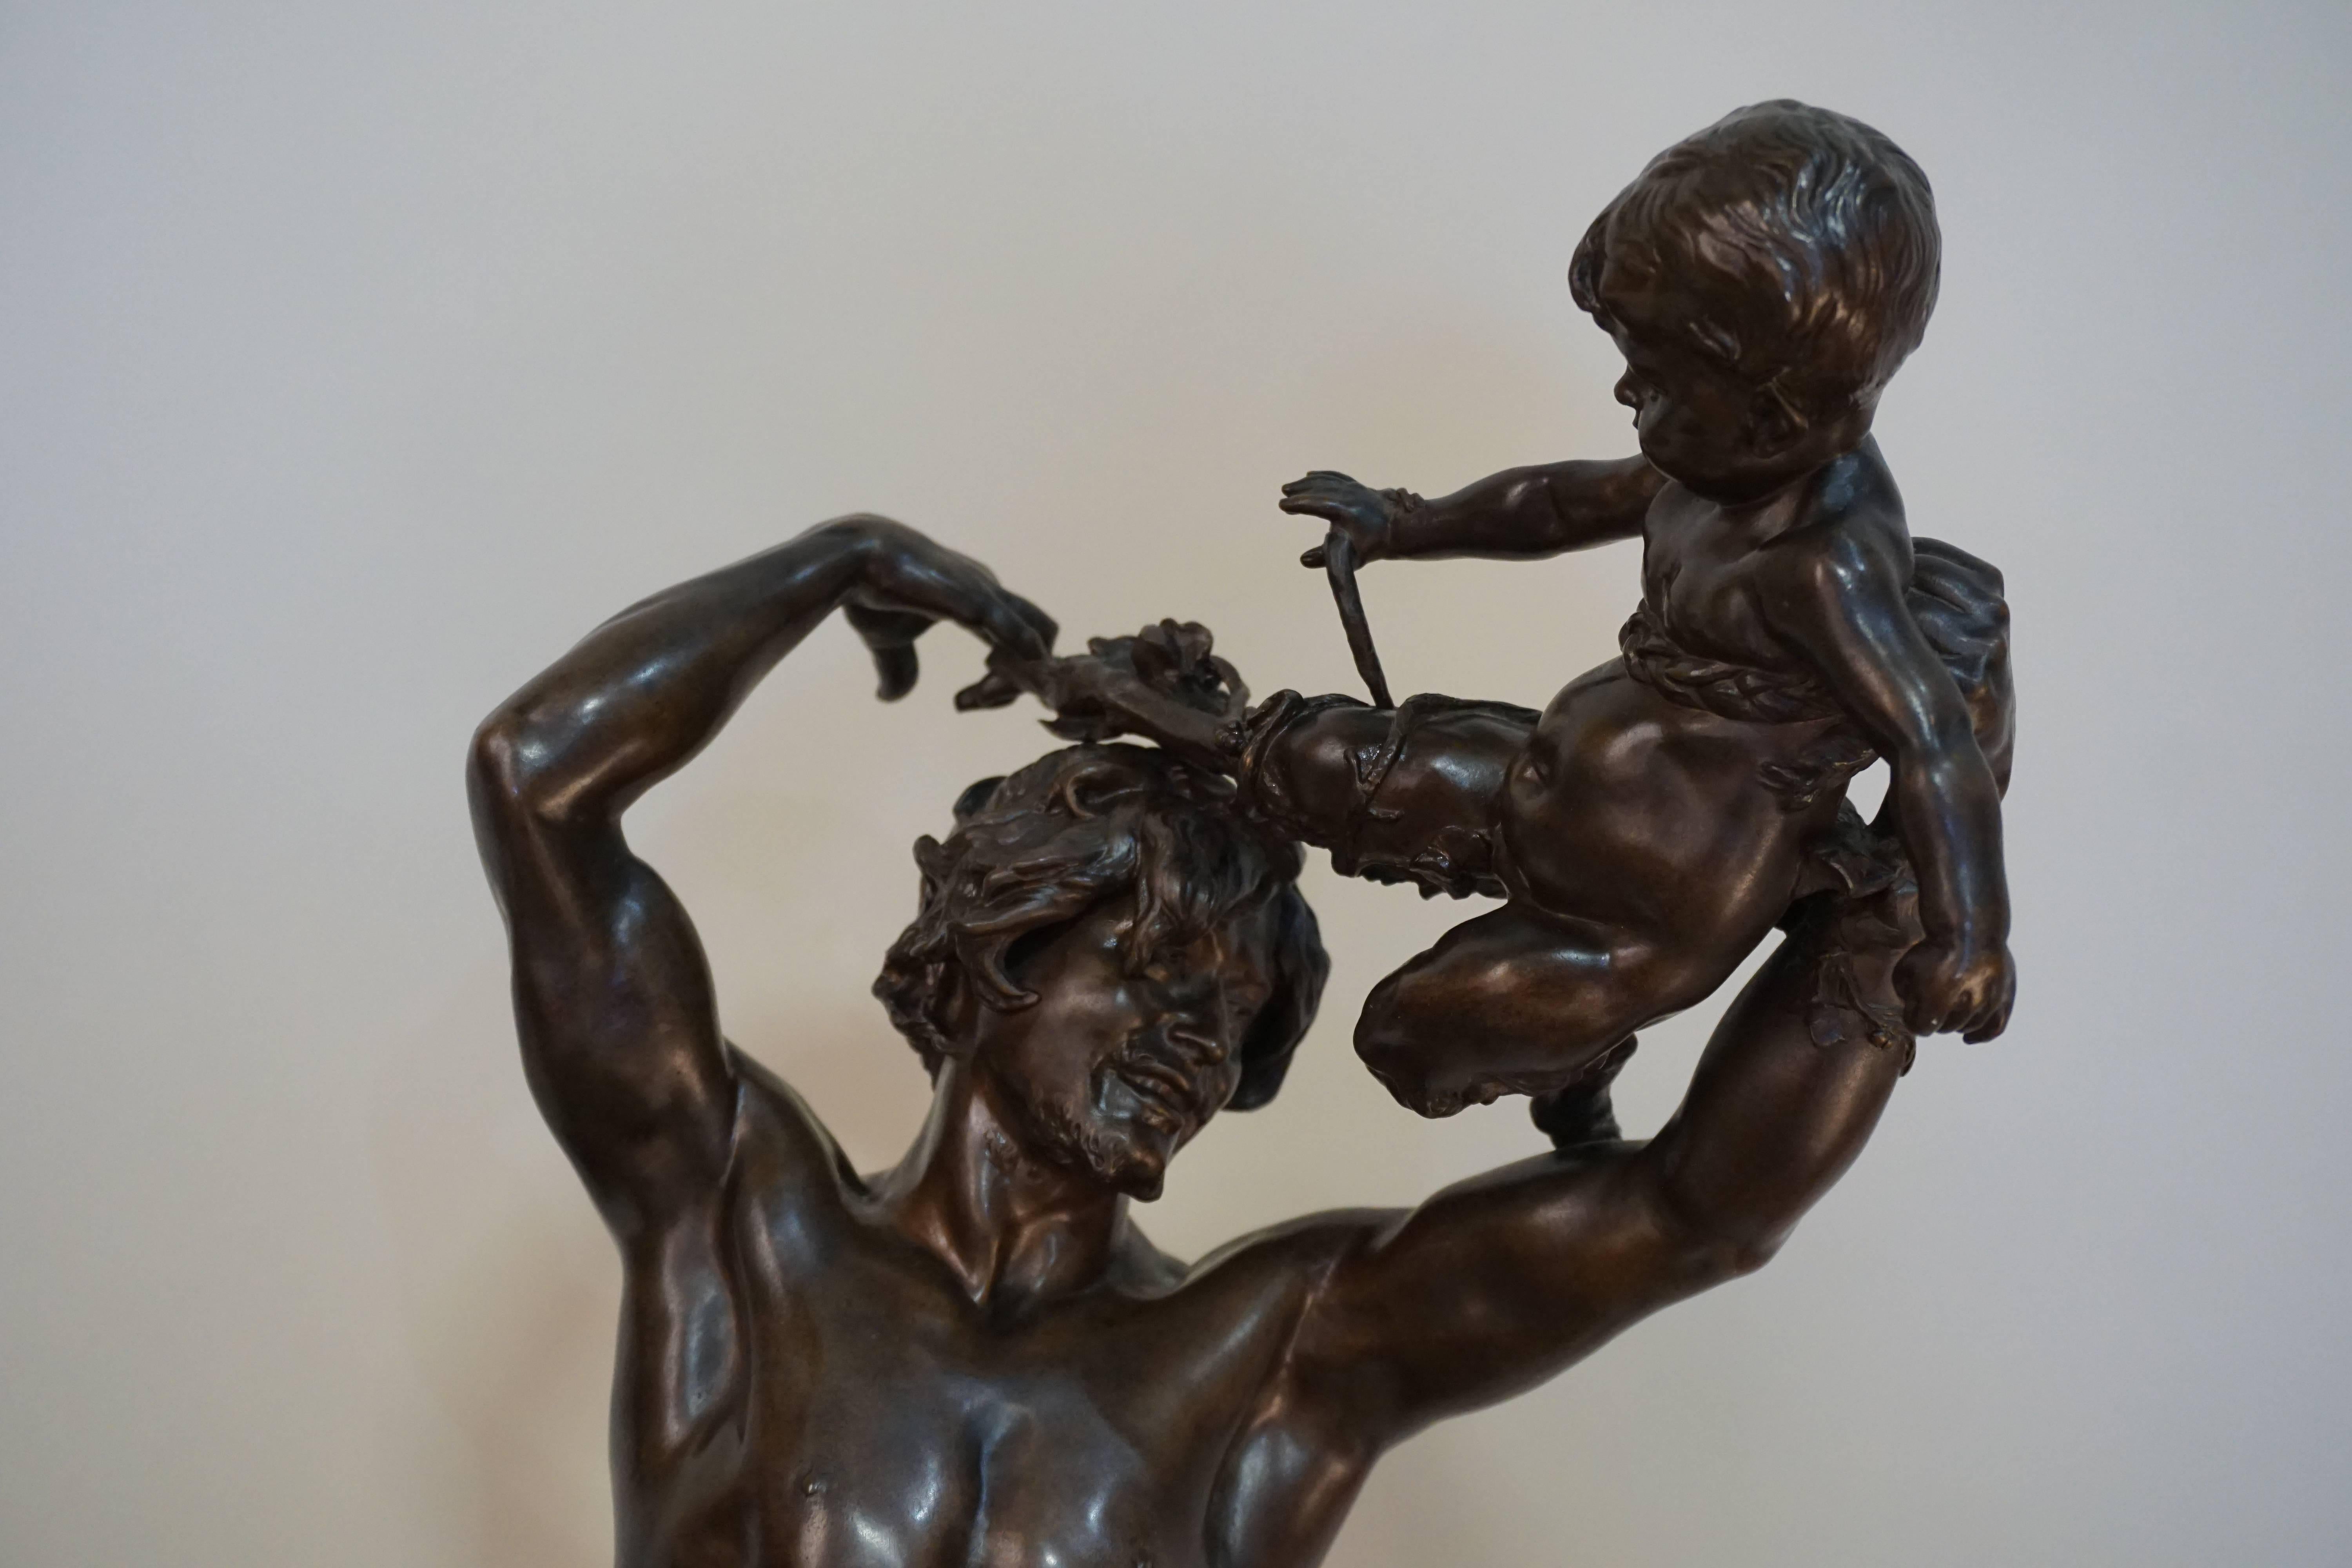 Bronze sculpture by the French sculptor Léopold Clément Steiner depicts the wine god Bacchus, who holds up a Satyr/Faun- Greek myth.